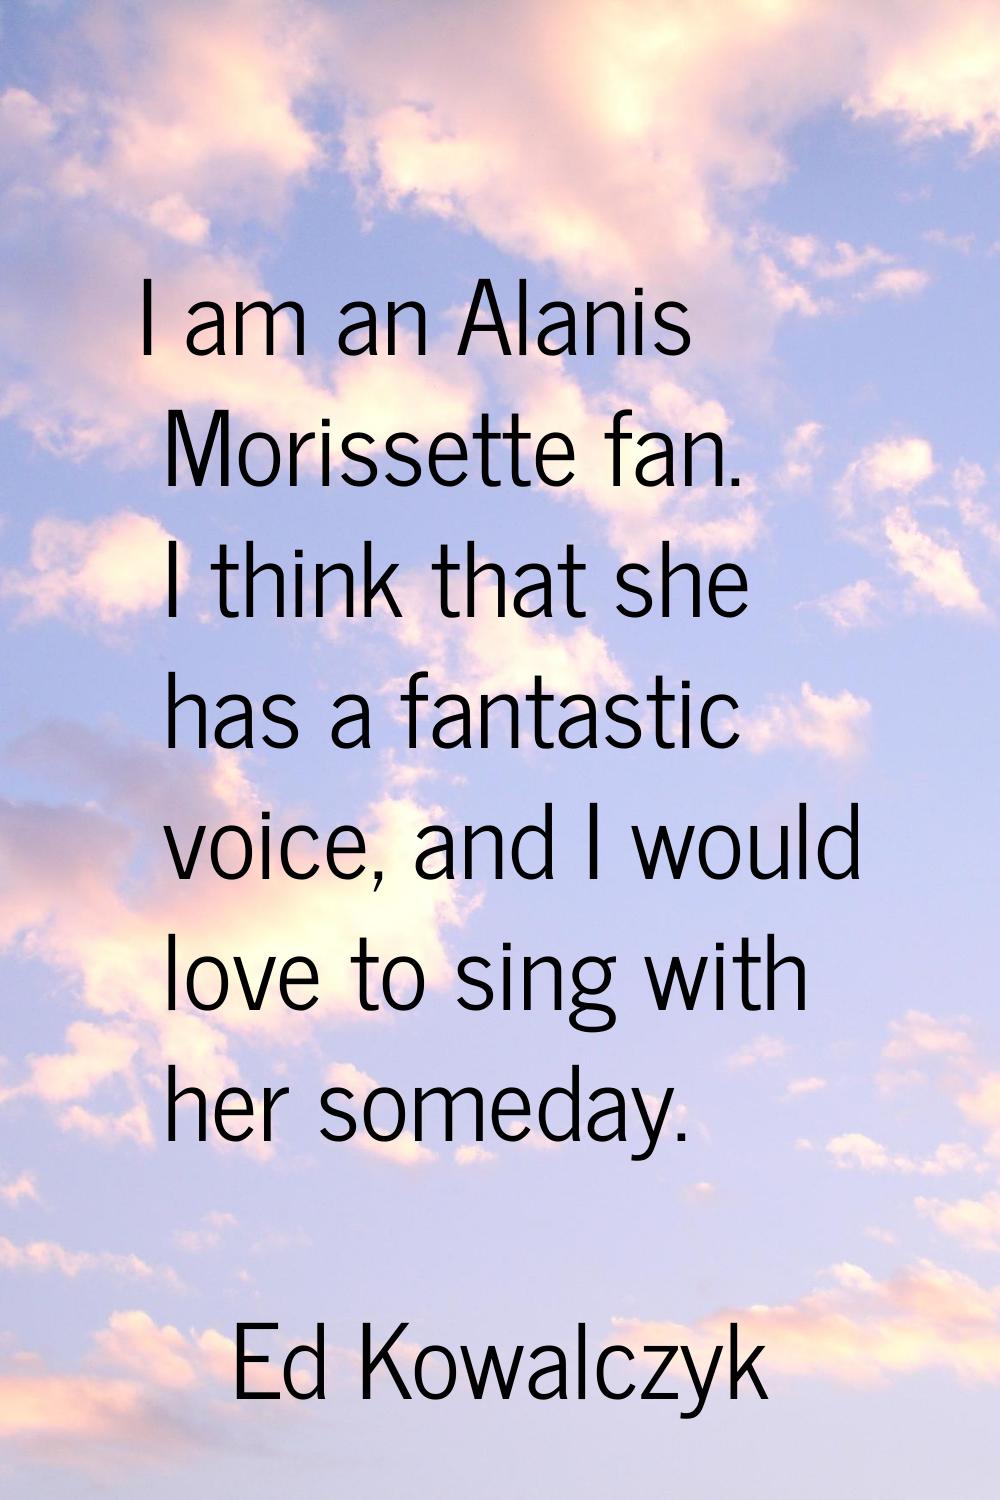 I am an Alanis Morissette fan. I think that she has a fantastic voice, and I would love to sing wit